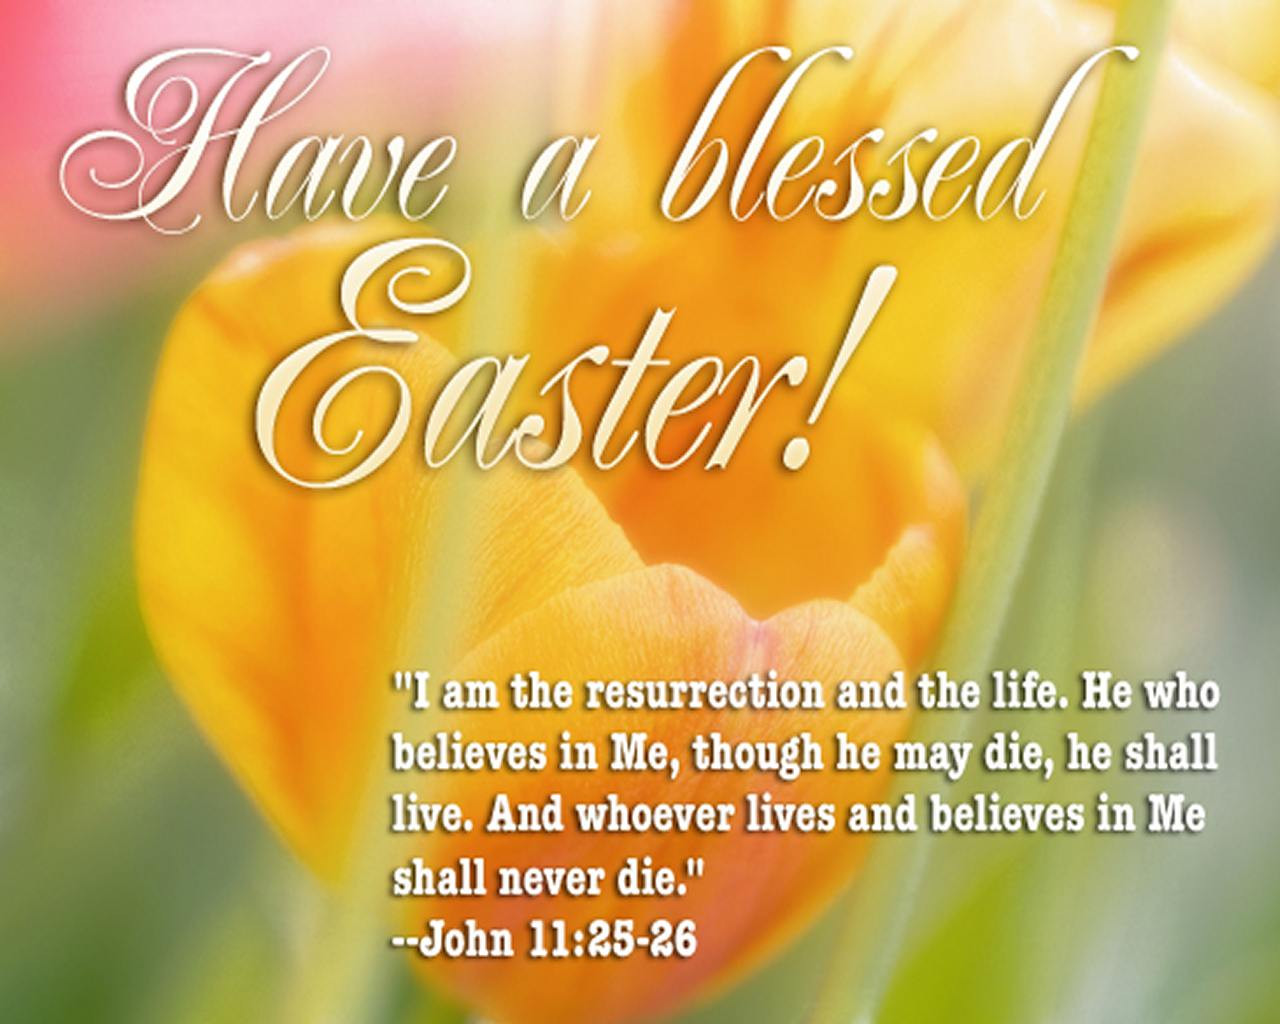 Easter Resurrection Quotes
 25 Heart Touching Easter Bible Verses and Resurrection Quotes